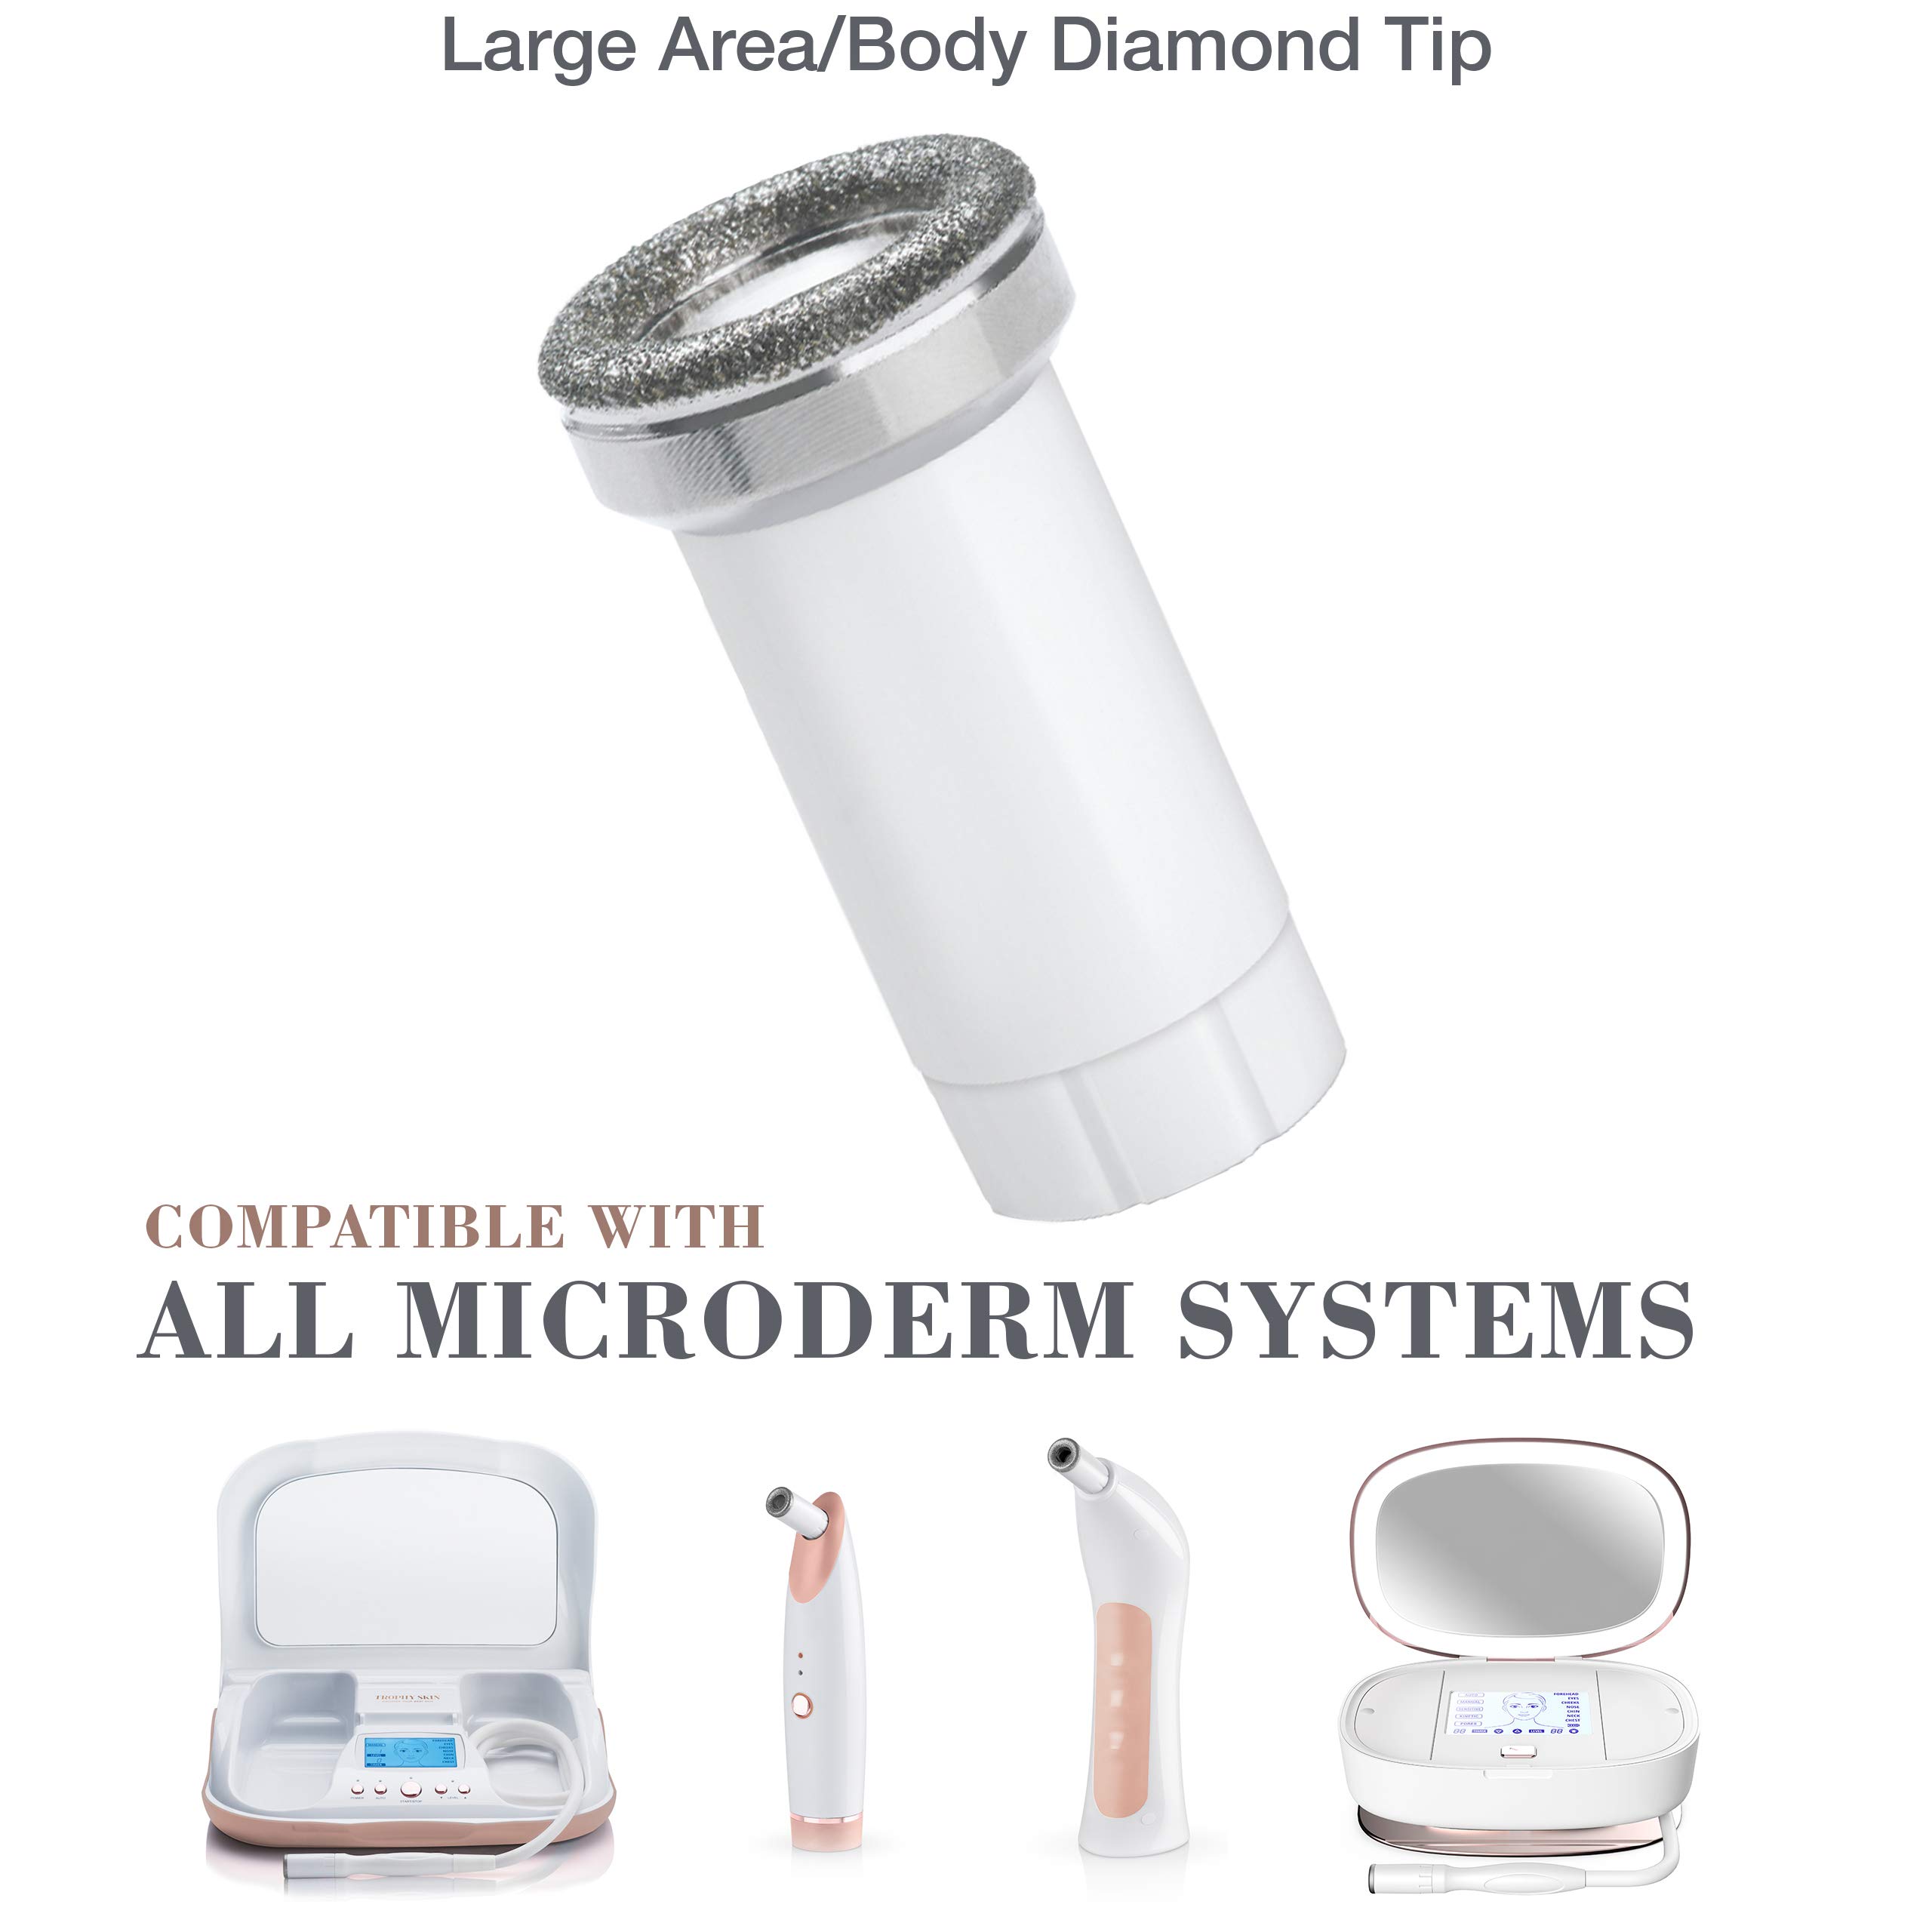 Trophy Skin Large Diamond Tip - Compatible with Any Trophy Skin Microdermabrasion Machine - Professional-Quality Home Spa Kit Accessory to Exfoliate and Rejuvenate Larger Body Parts with Real Diamonds